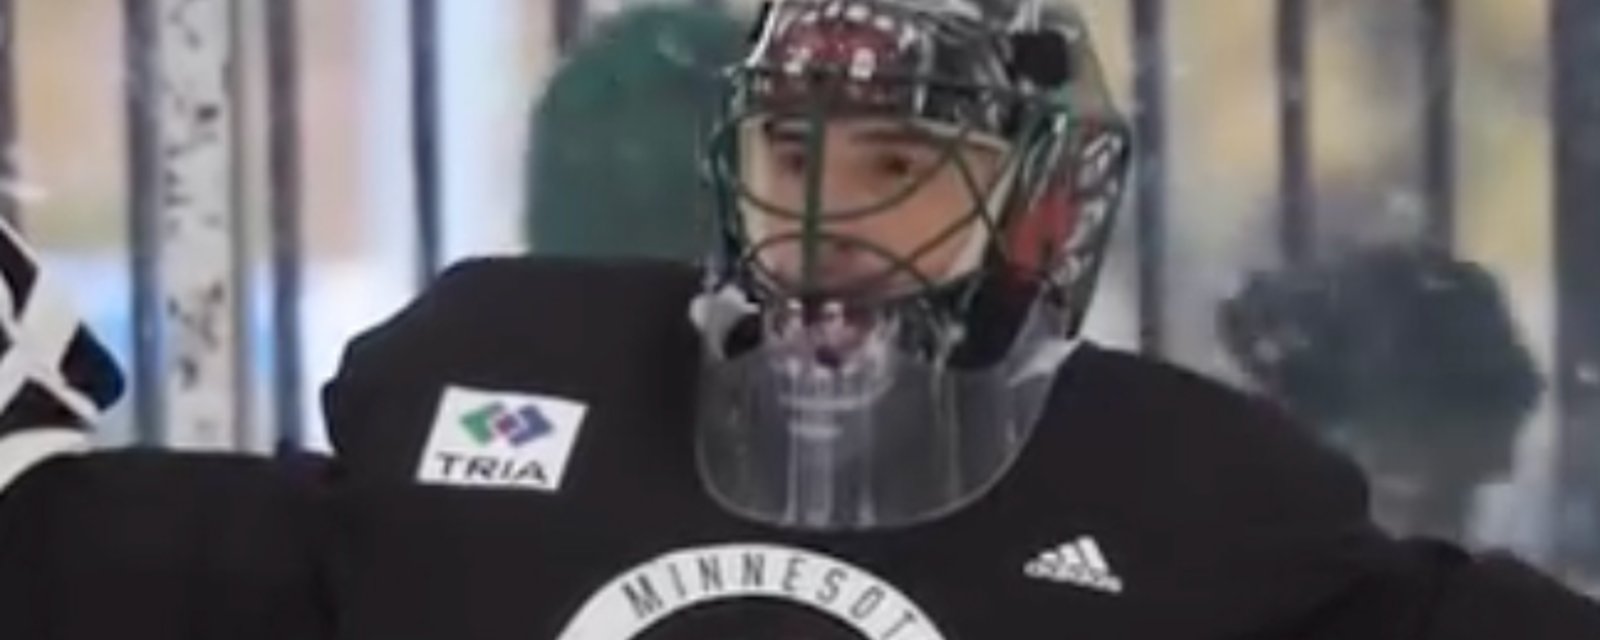 Video of Marc-Andre Fleury emerges in which he tells his true feelings about his job